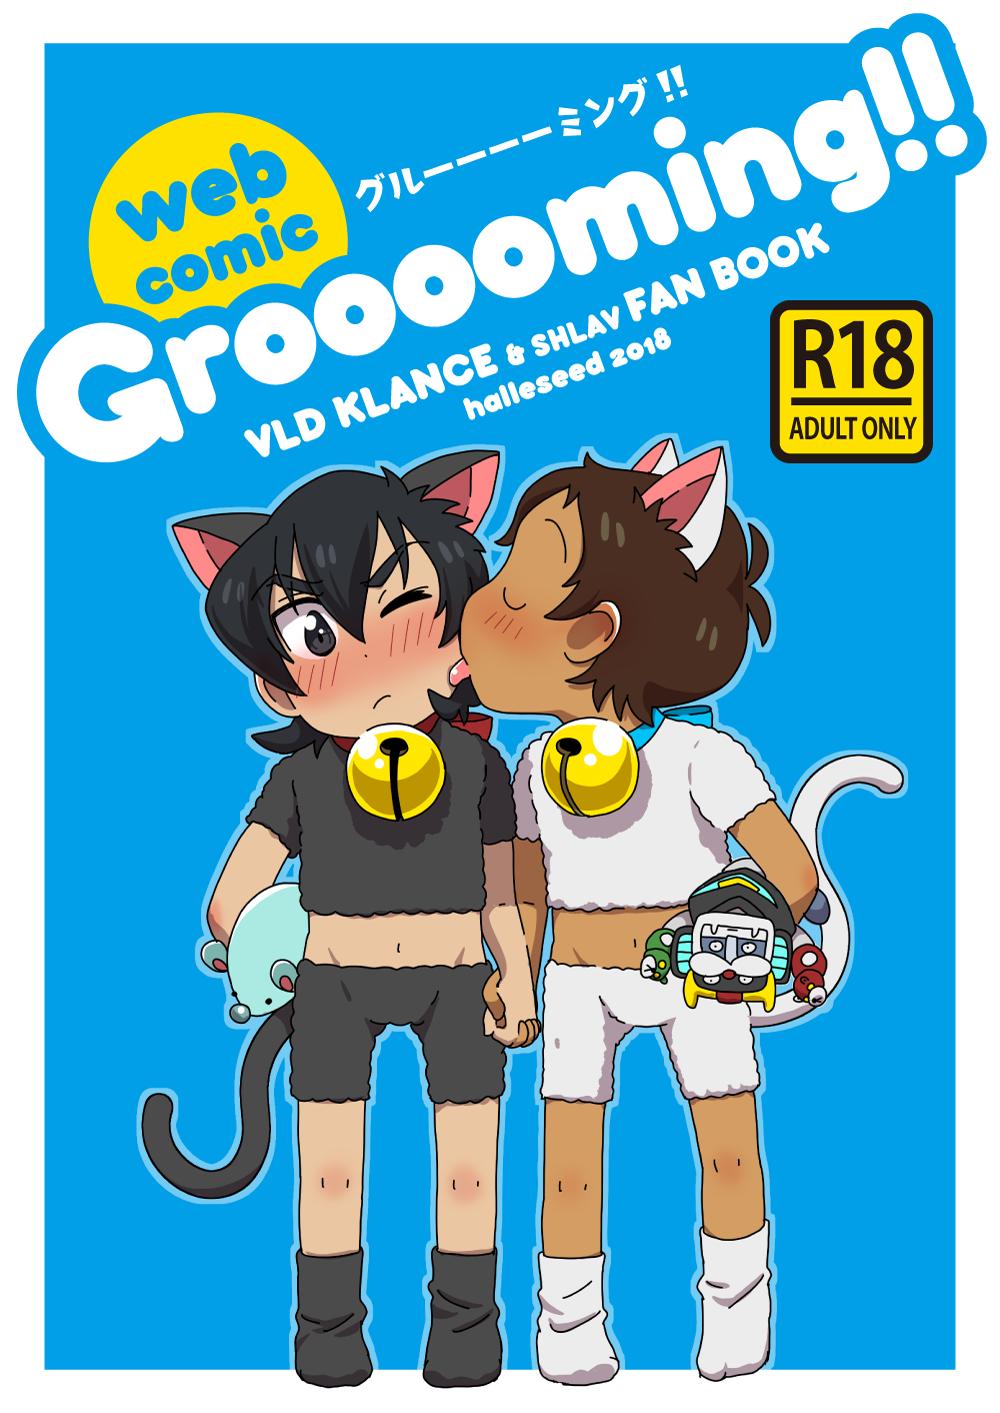 Spooning グルーーーーミング！ - Voltron Amateurs - Picture 1